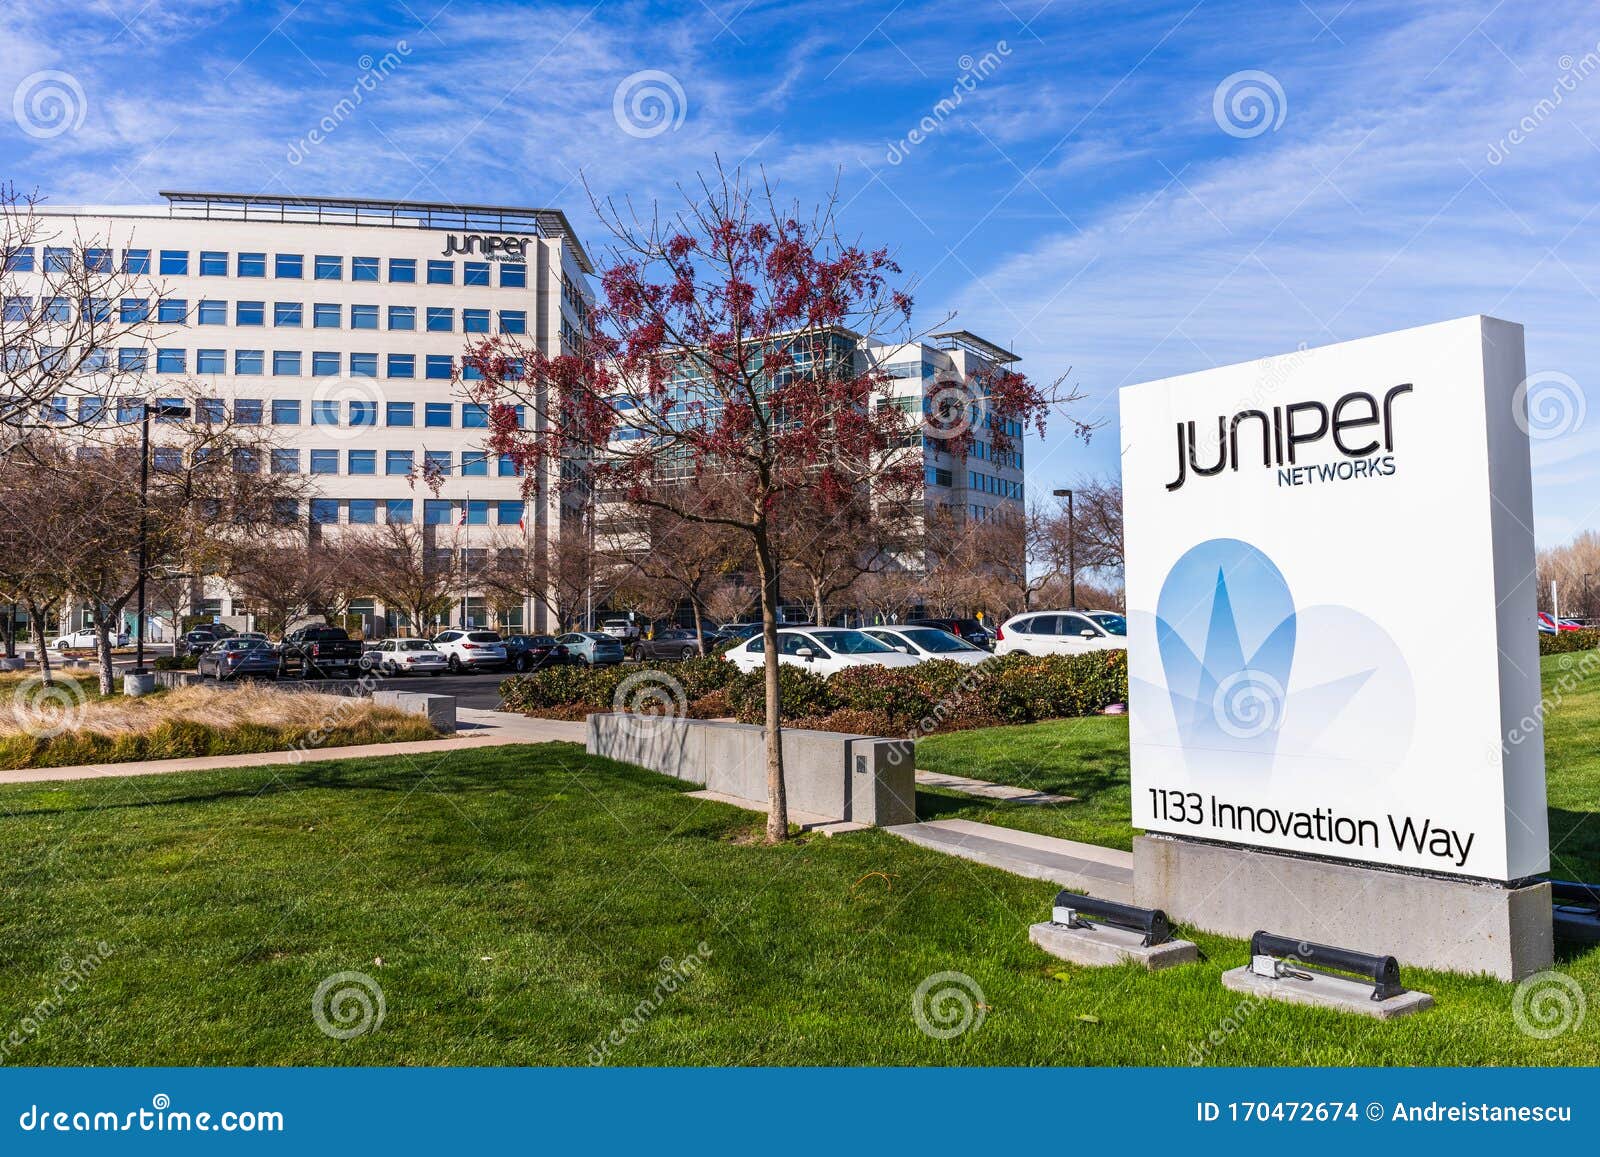 Juniper networks north ryde humane society in sioux falls south dakota